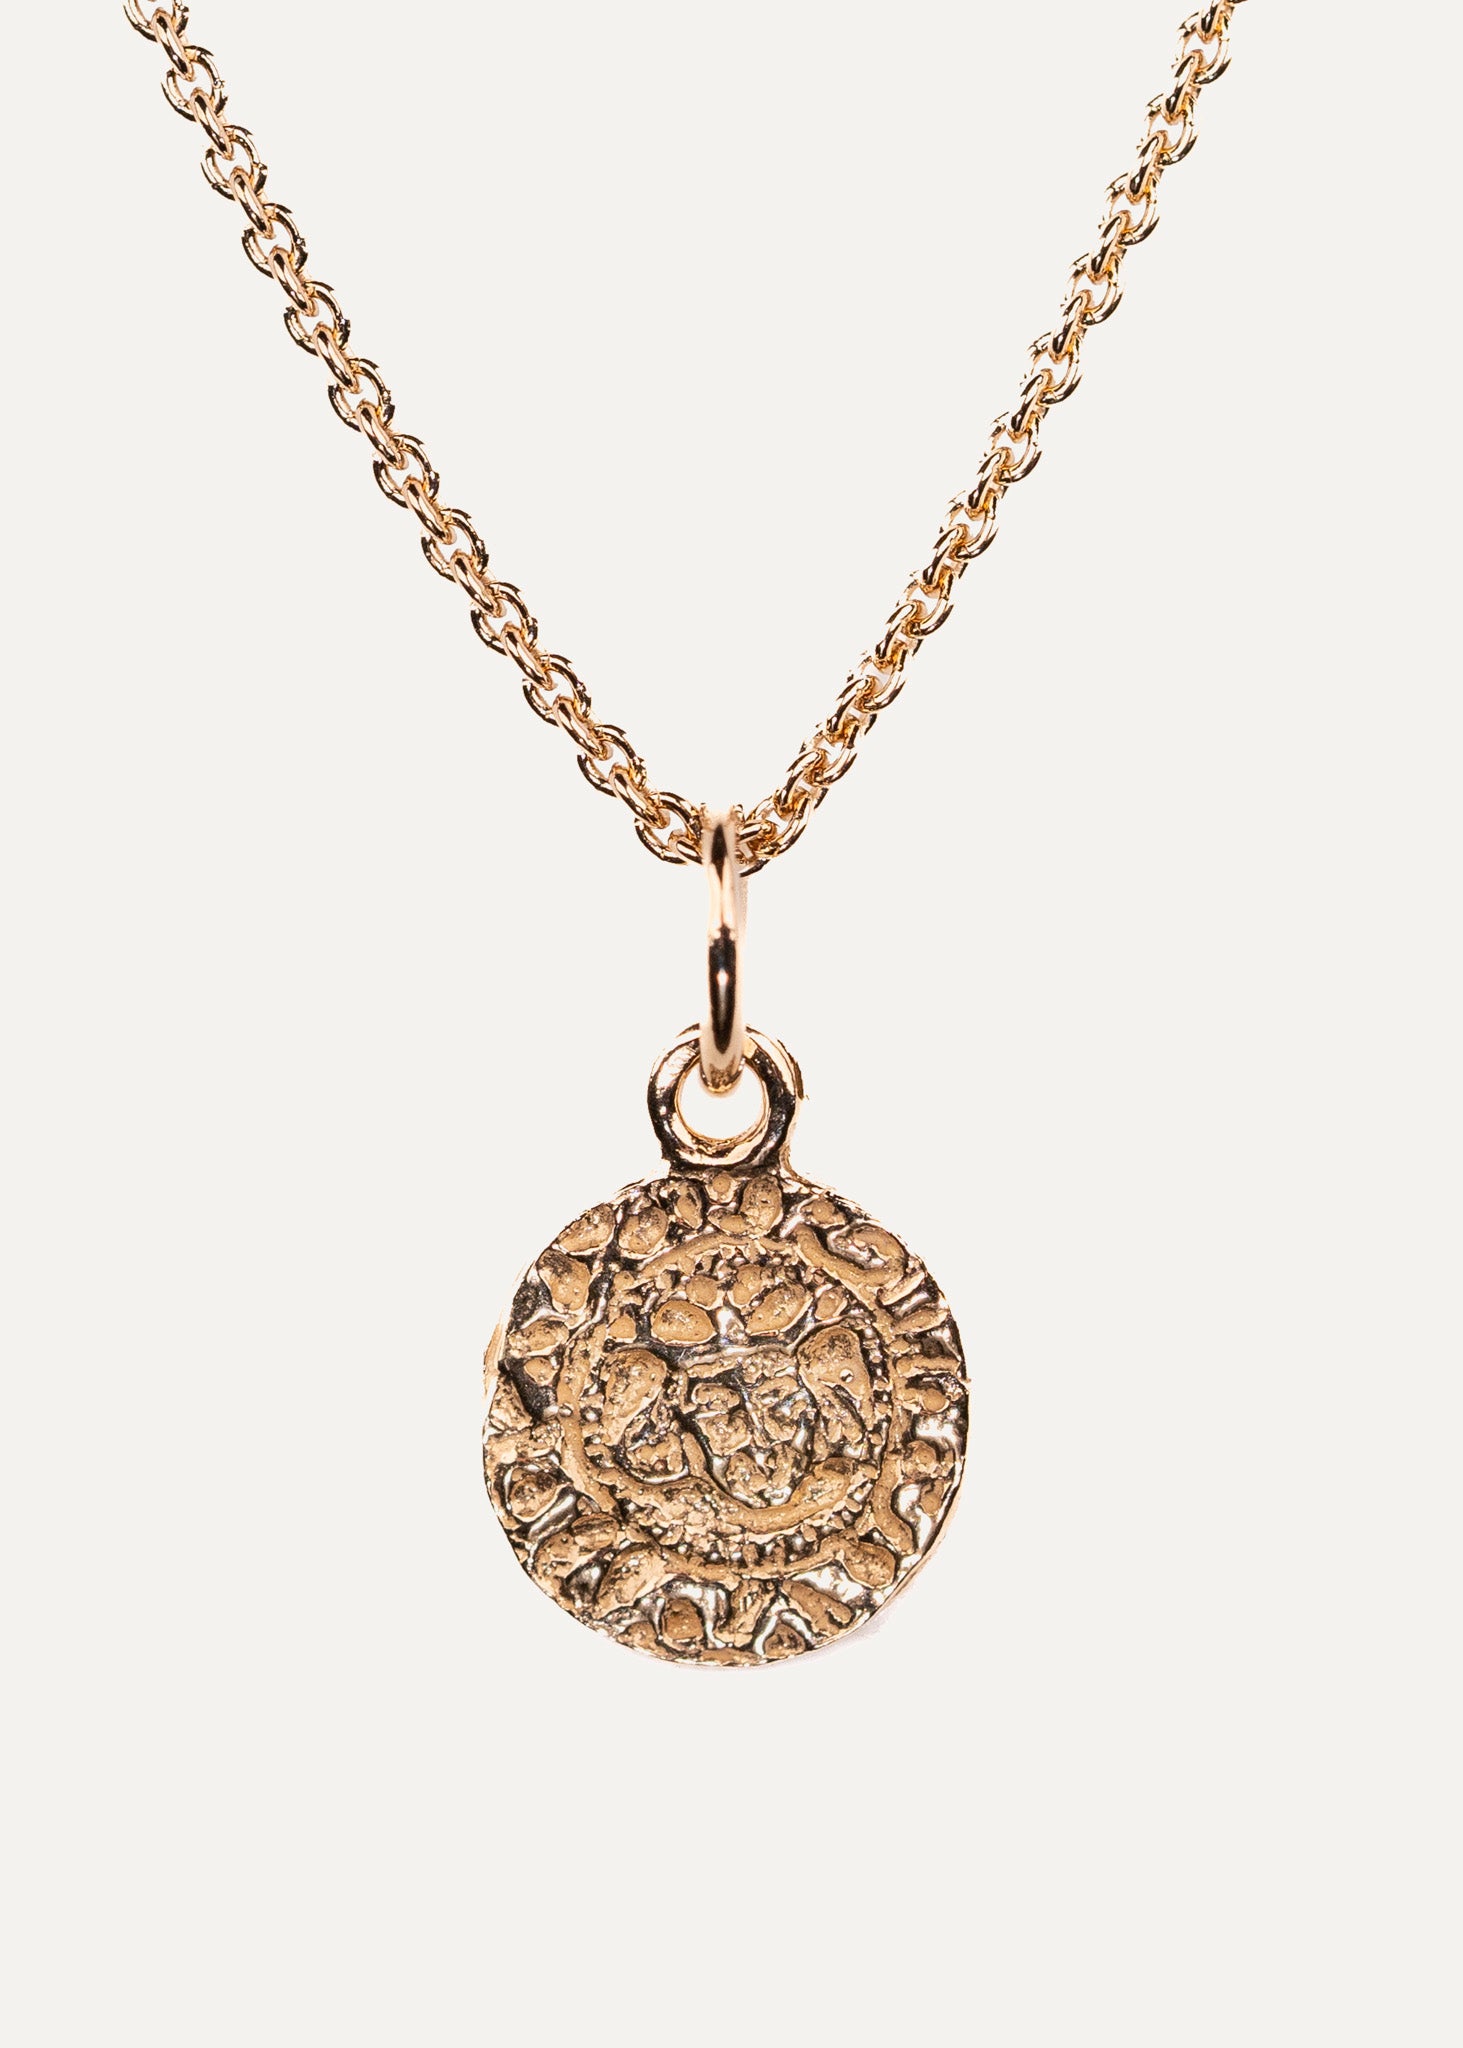 Quarterpenny pendant in yellow gold